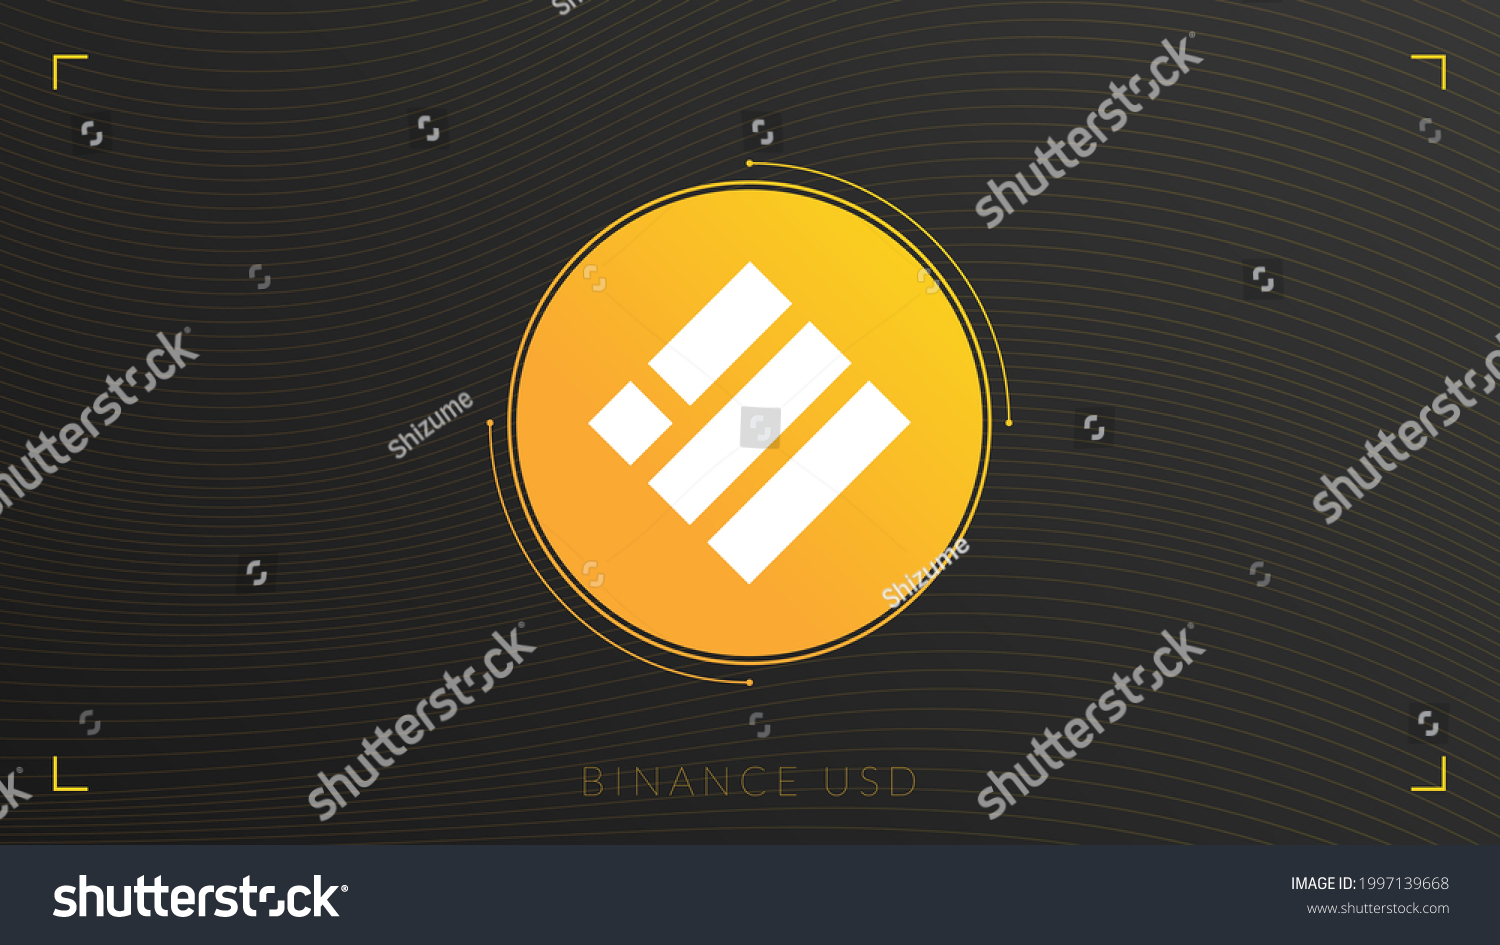 SVG of BUSD cryptocurrency logo on dark background with wavy thin lines. svg